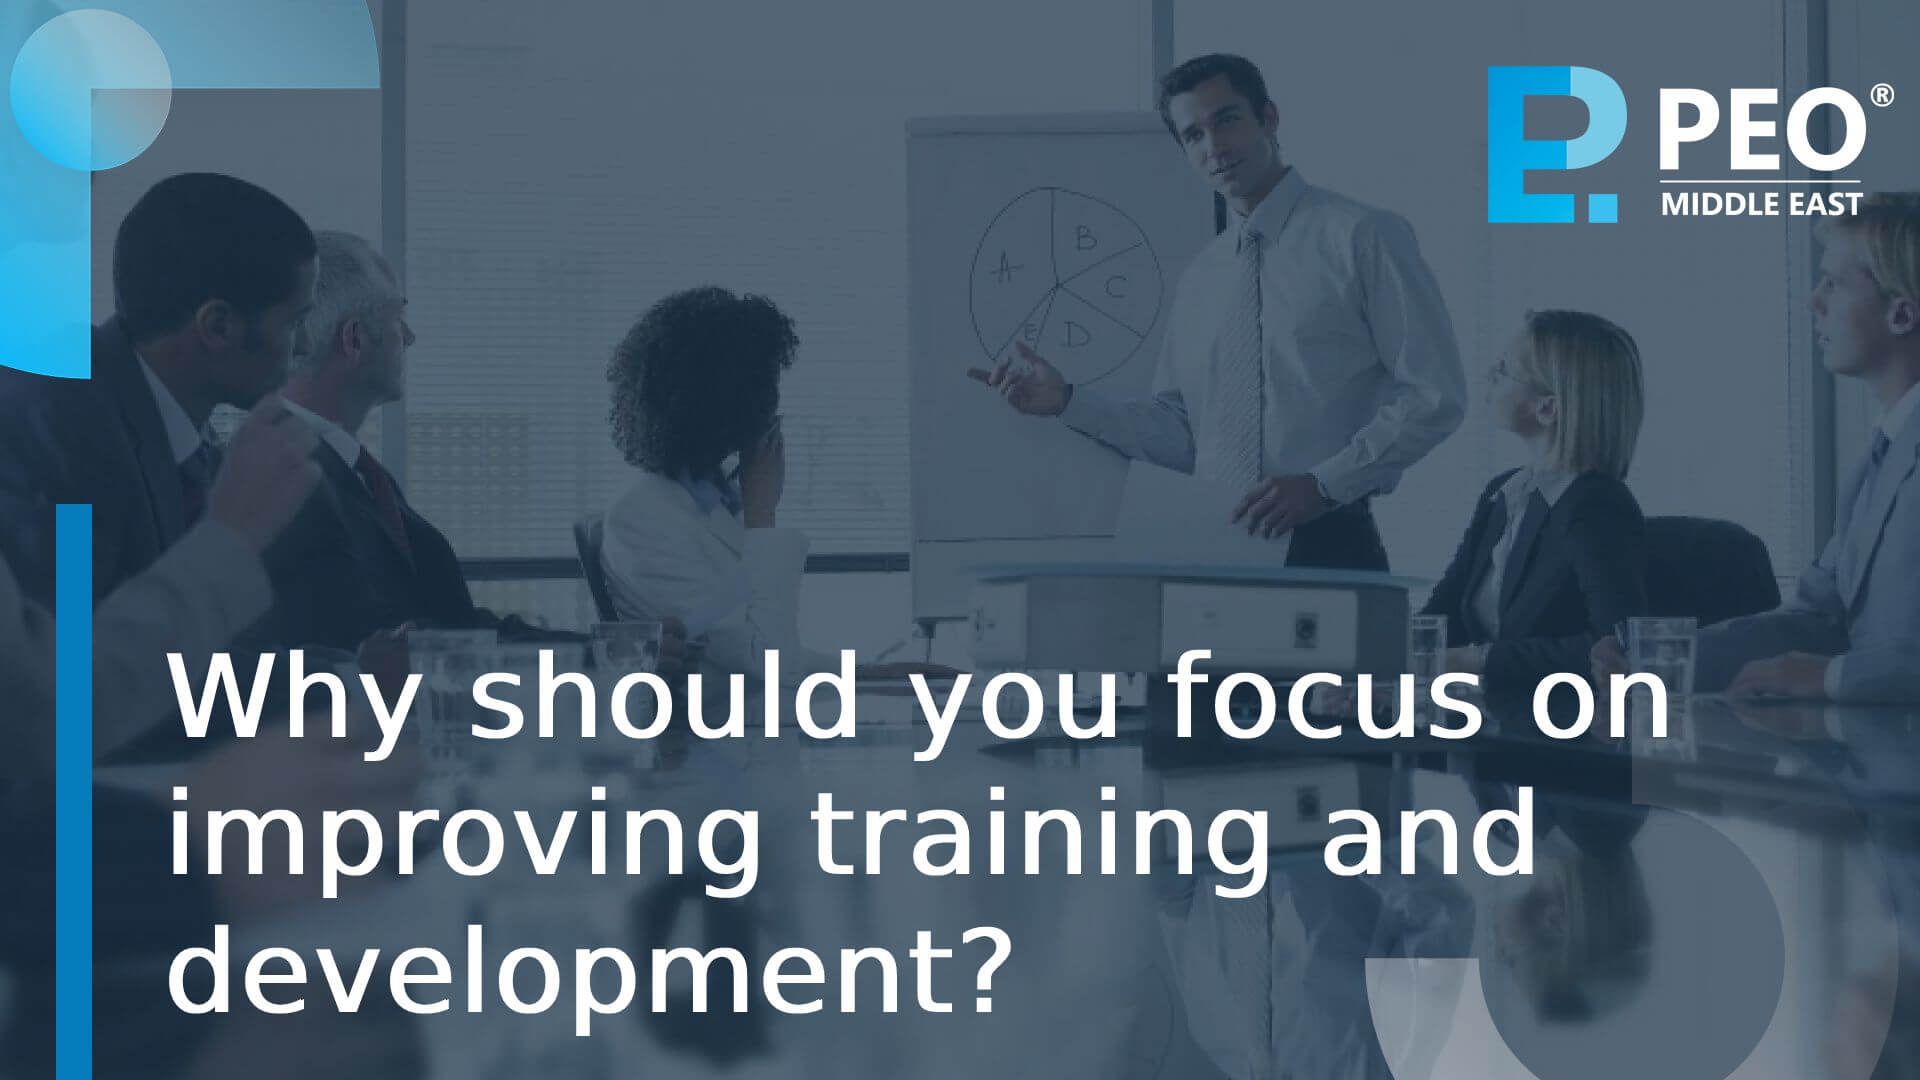 Why should you focus on improving training and development?